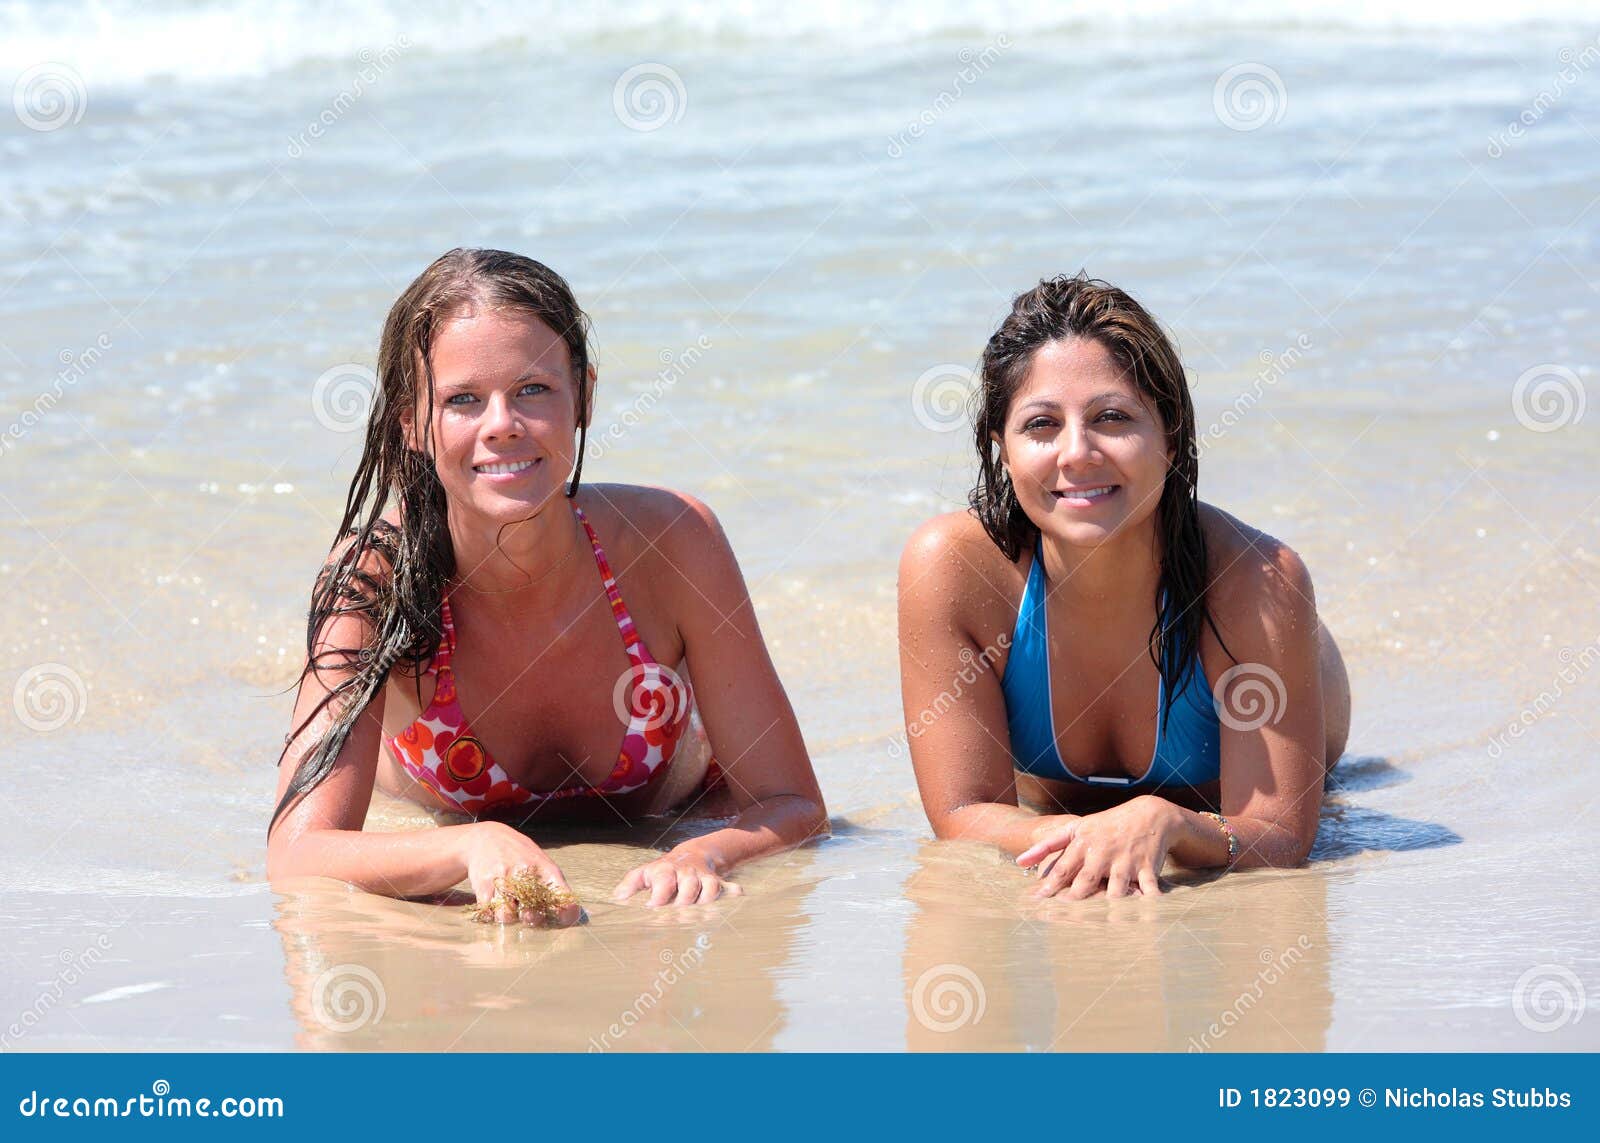 Two Attractive Young Women Lying on a Sunny Beach Near the Water Stock Image